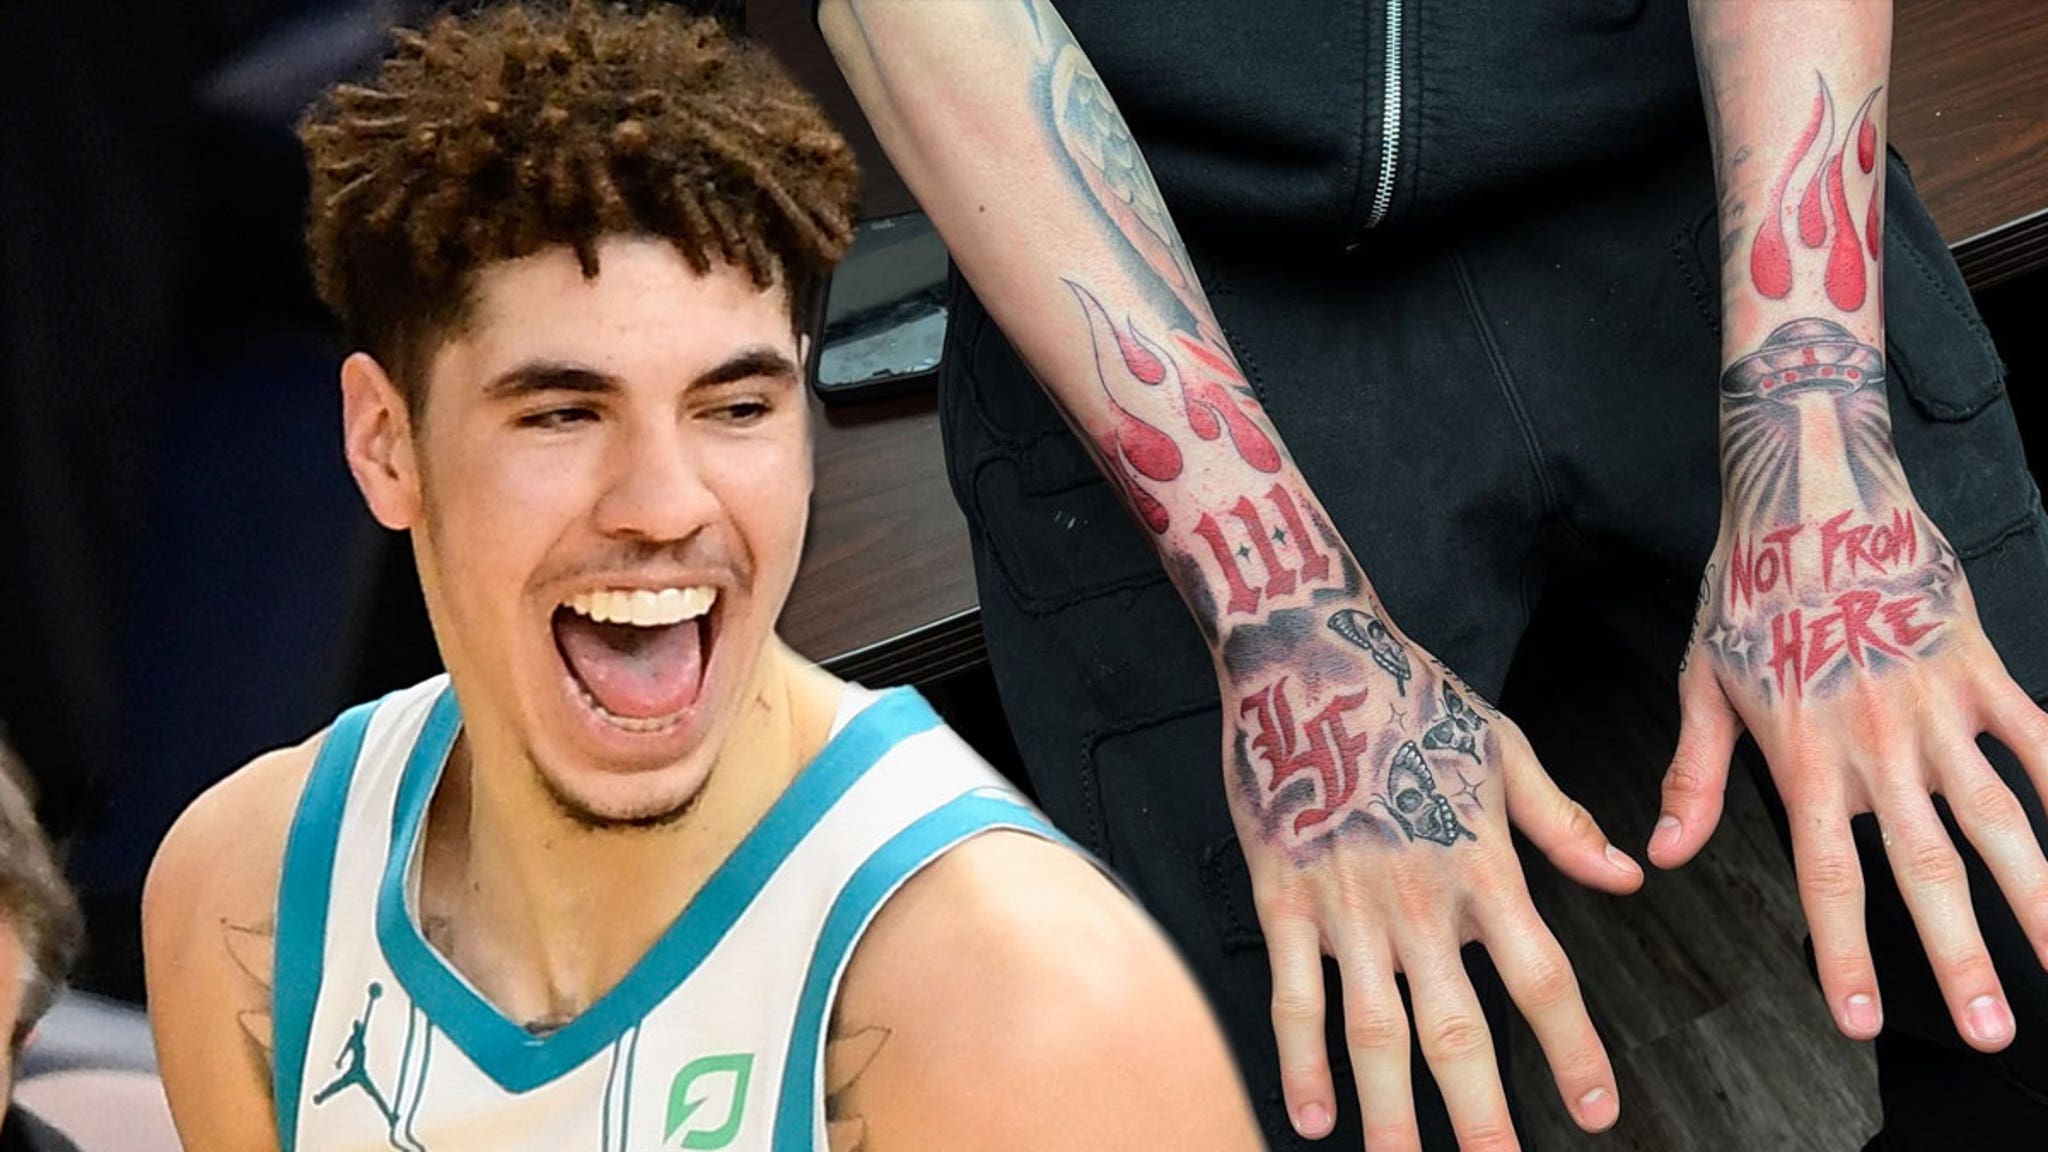 LaMelo Ball Gets Tattoo Of 'Rare' Angel With His Hairdo On His Forearm